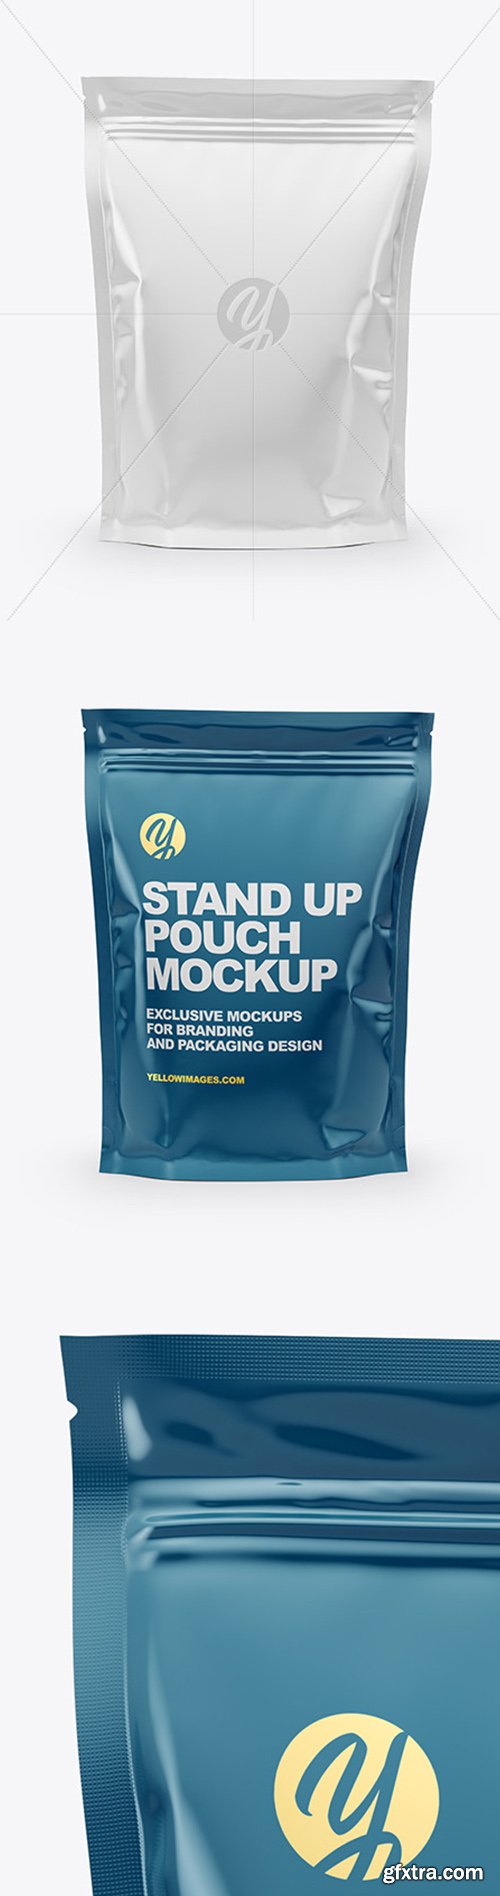 Glossy Stand Up Pouch Mockup 52292